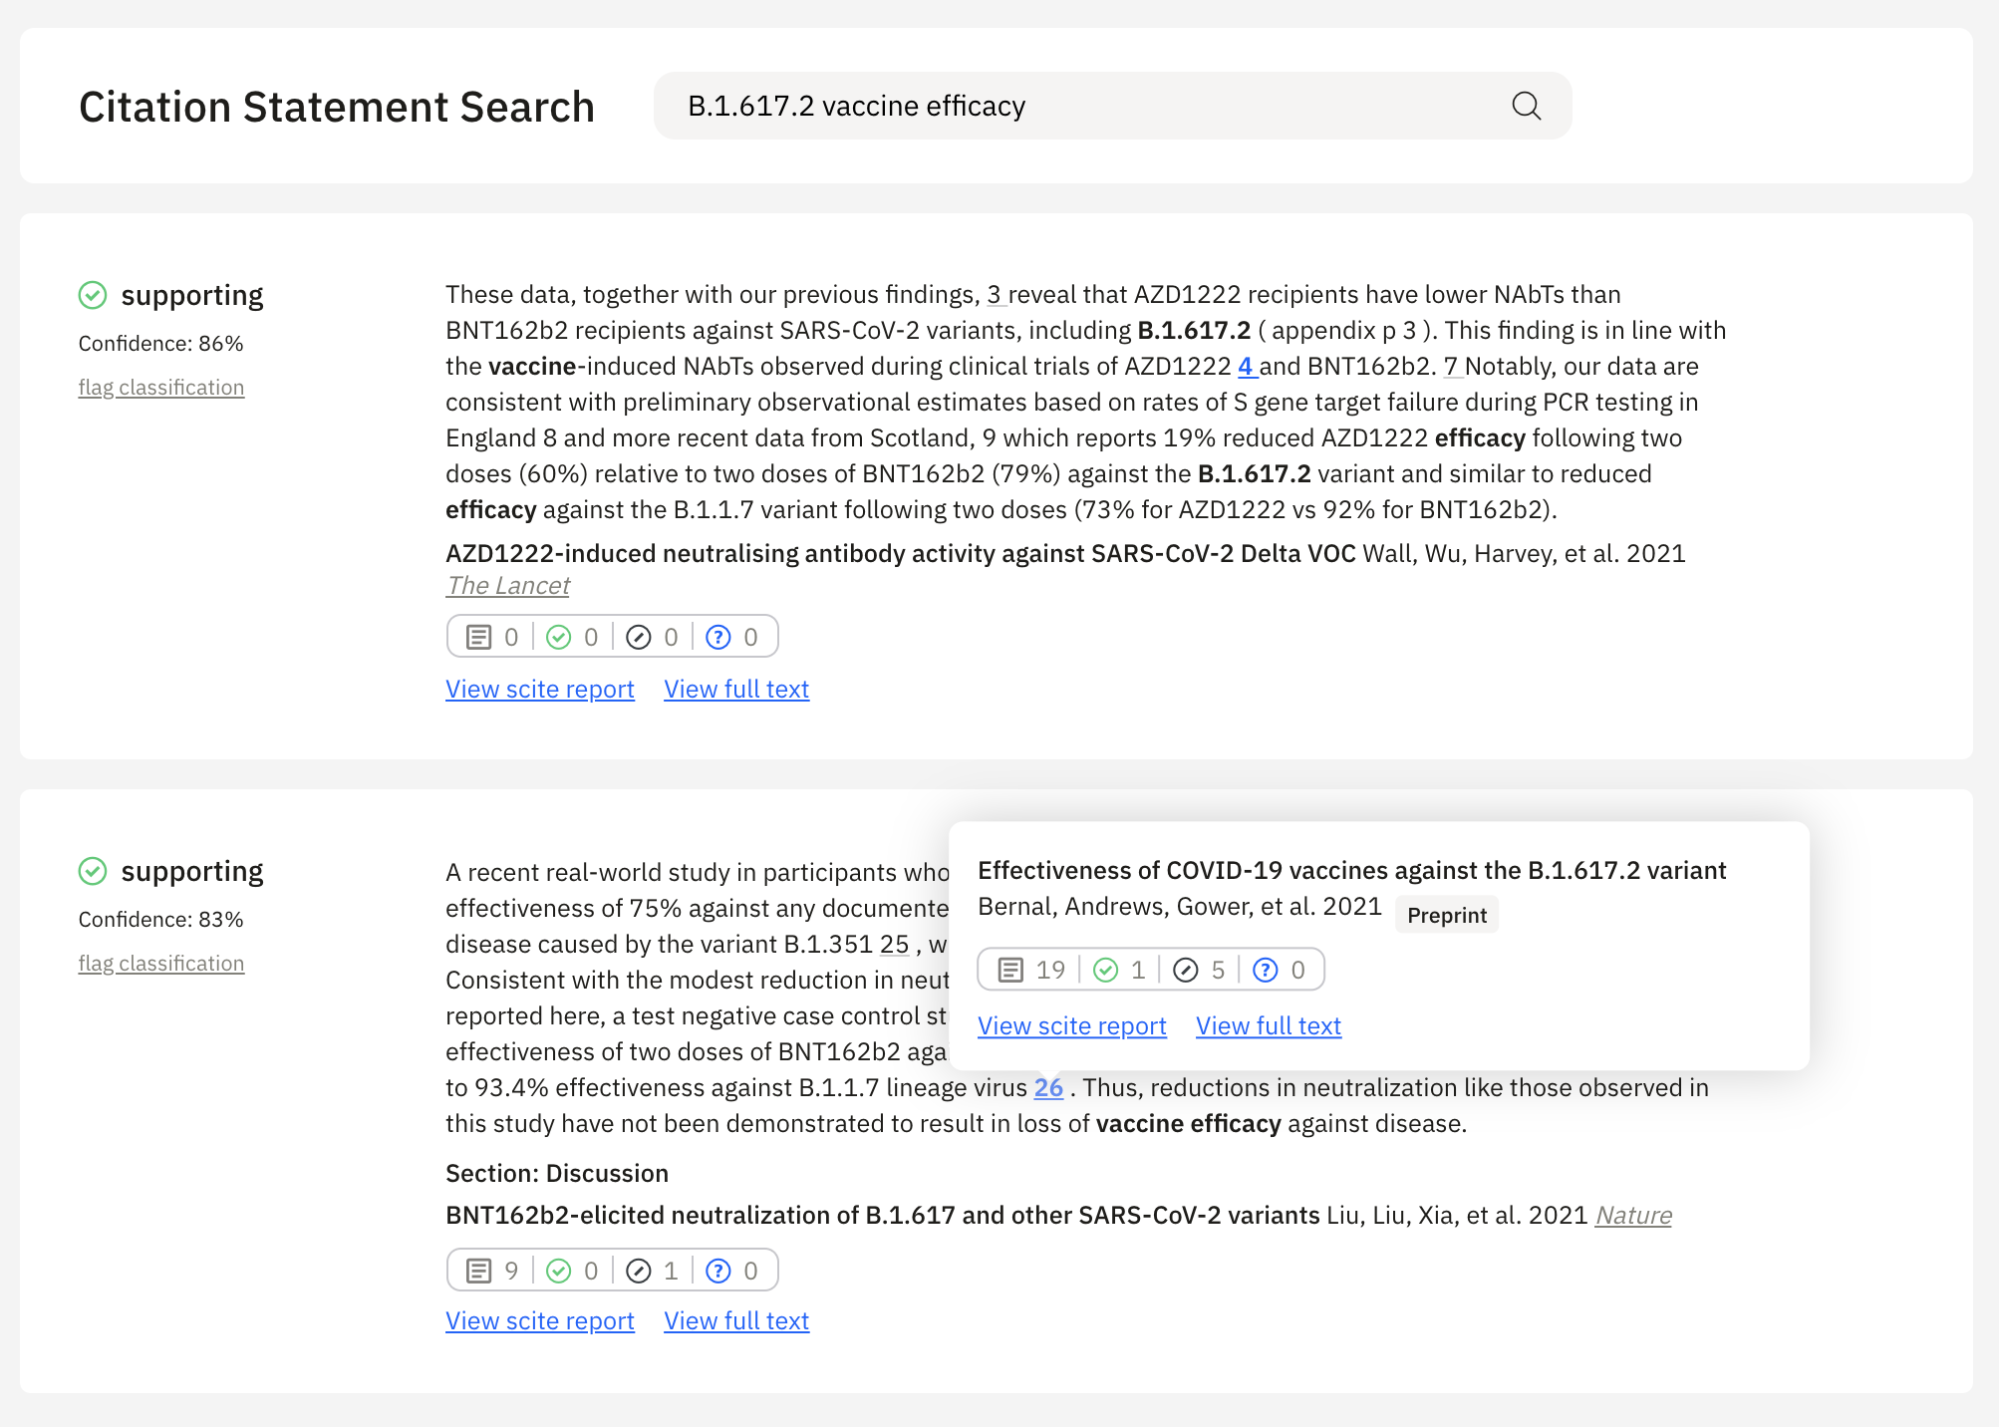 Example of a citation statement search showing a search for vaccine efficacy.